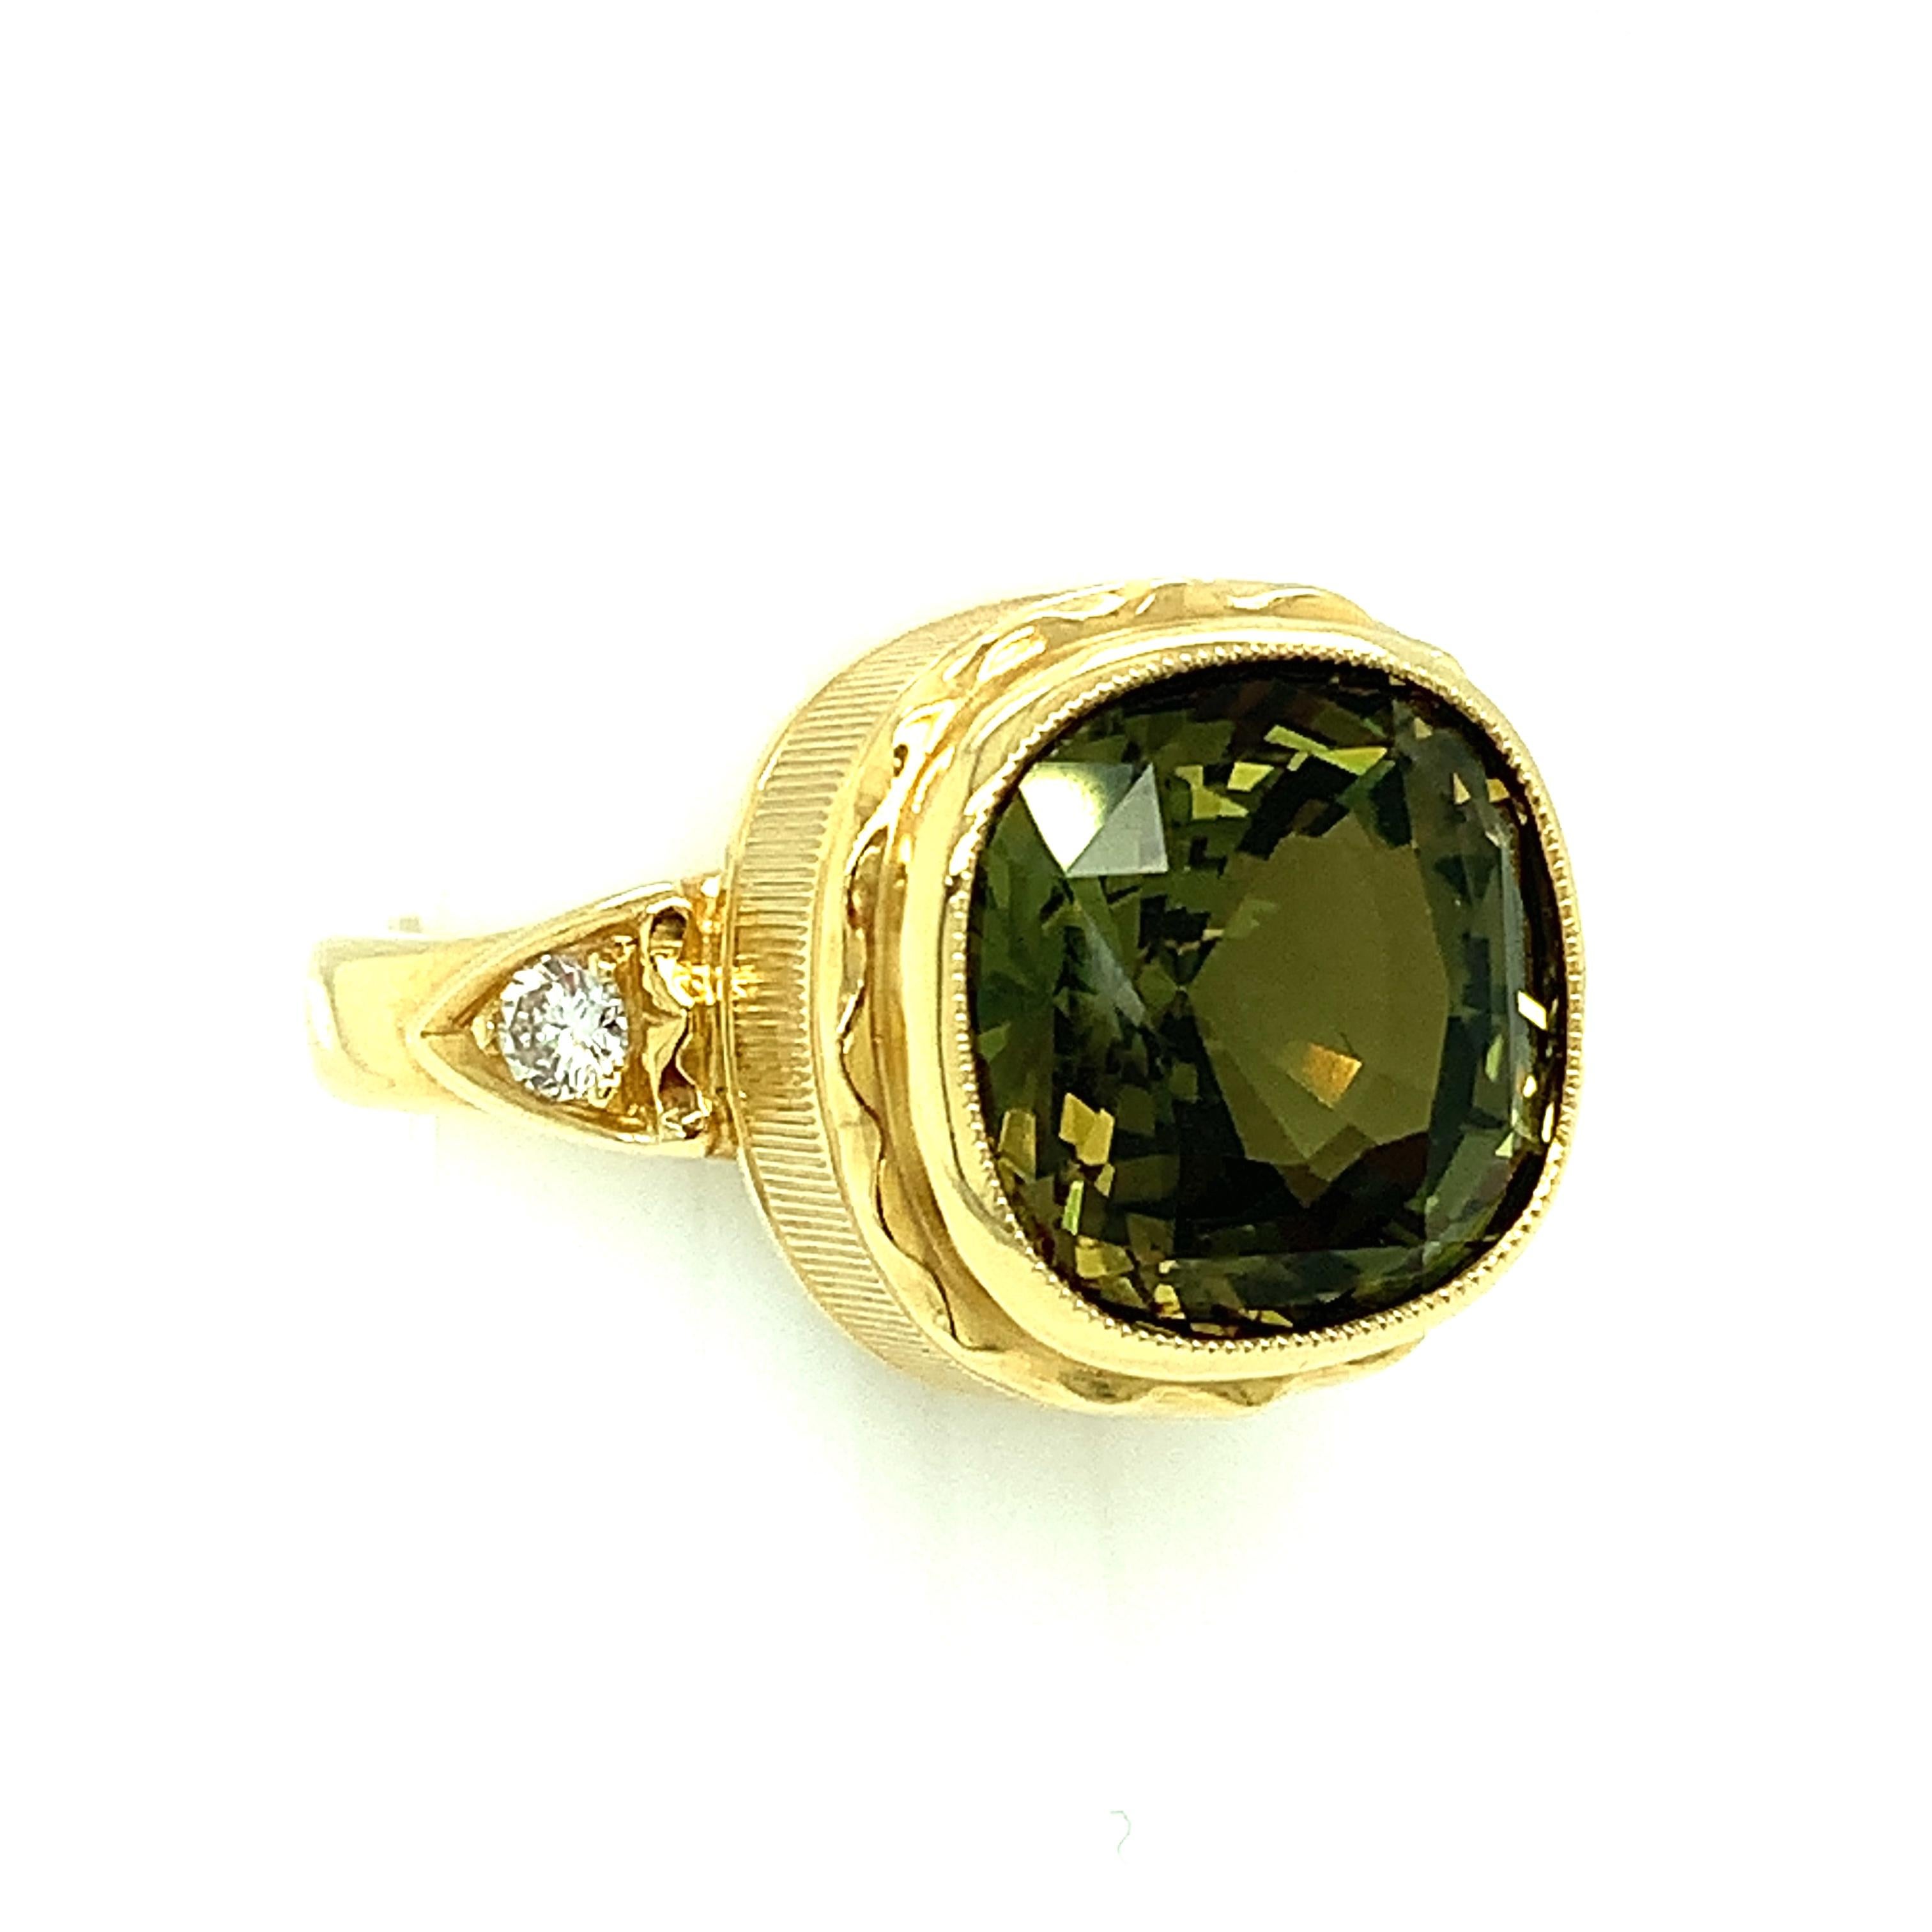 Cushion Cut 8.16 Carat Chrysoberyl and Diamond Ring, Hand-Engraved 18k Yellow Gold  For Sale